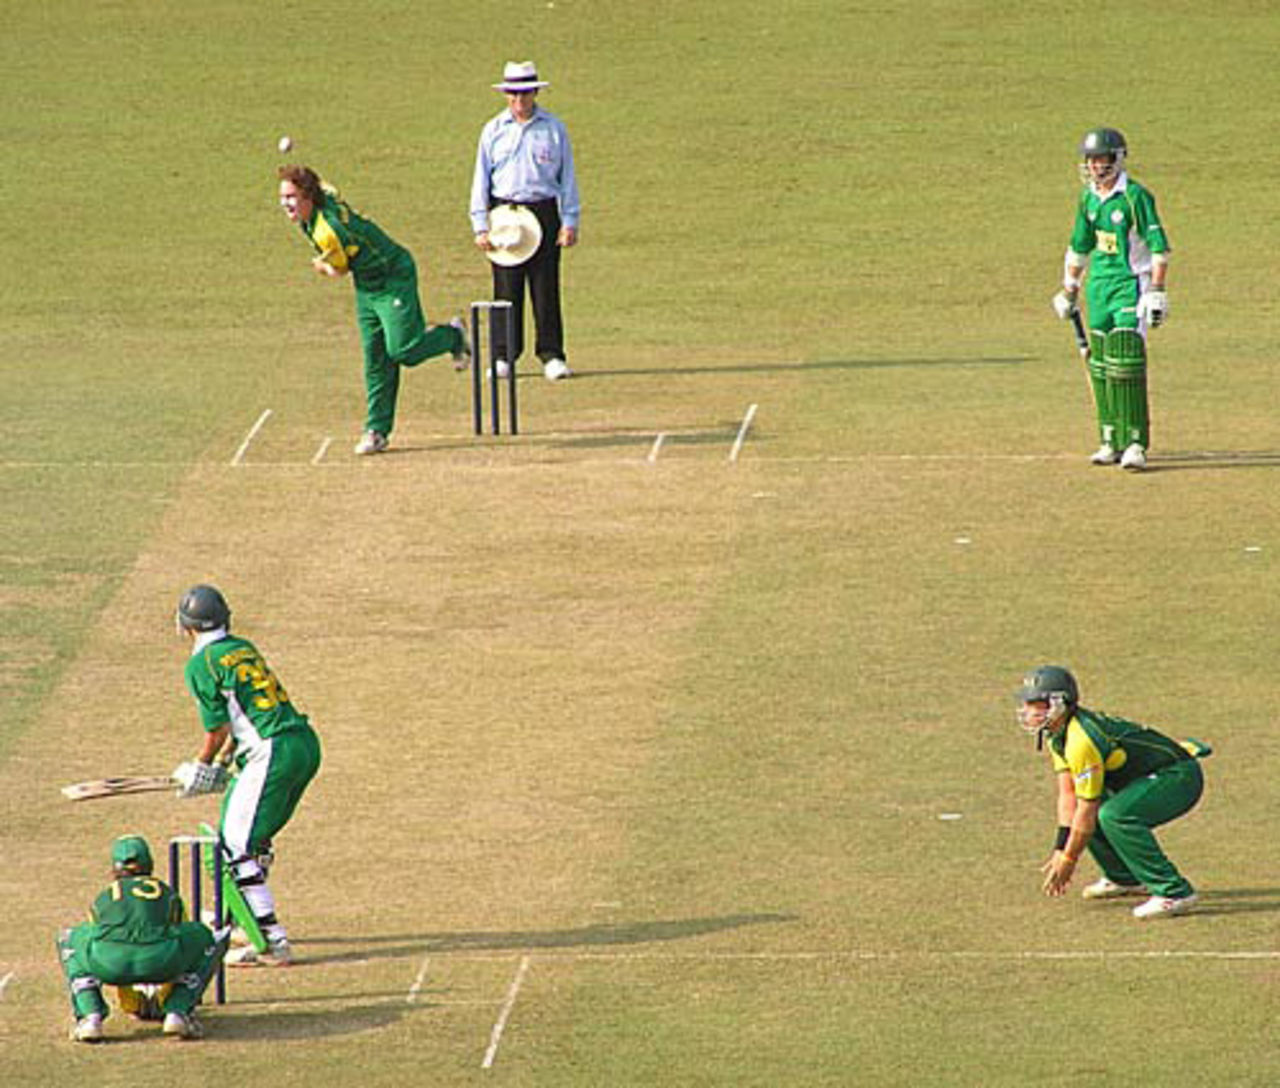 A general view of the match between Australia U-19s and South Africa U-19s, Colombo, February 5, 2006